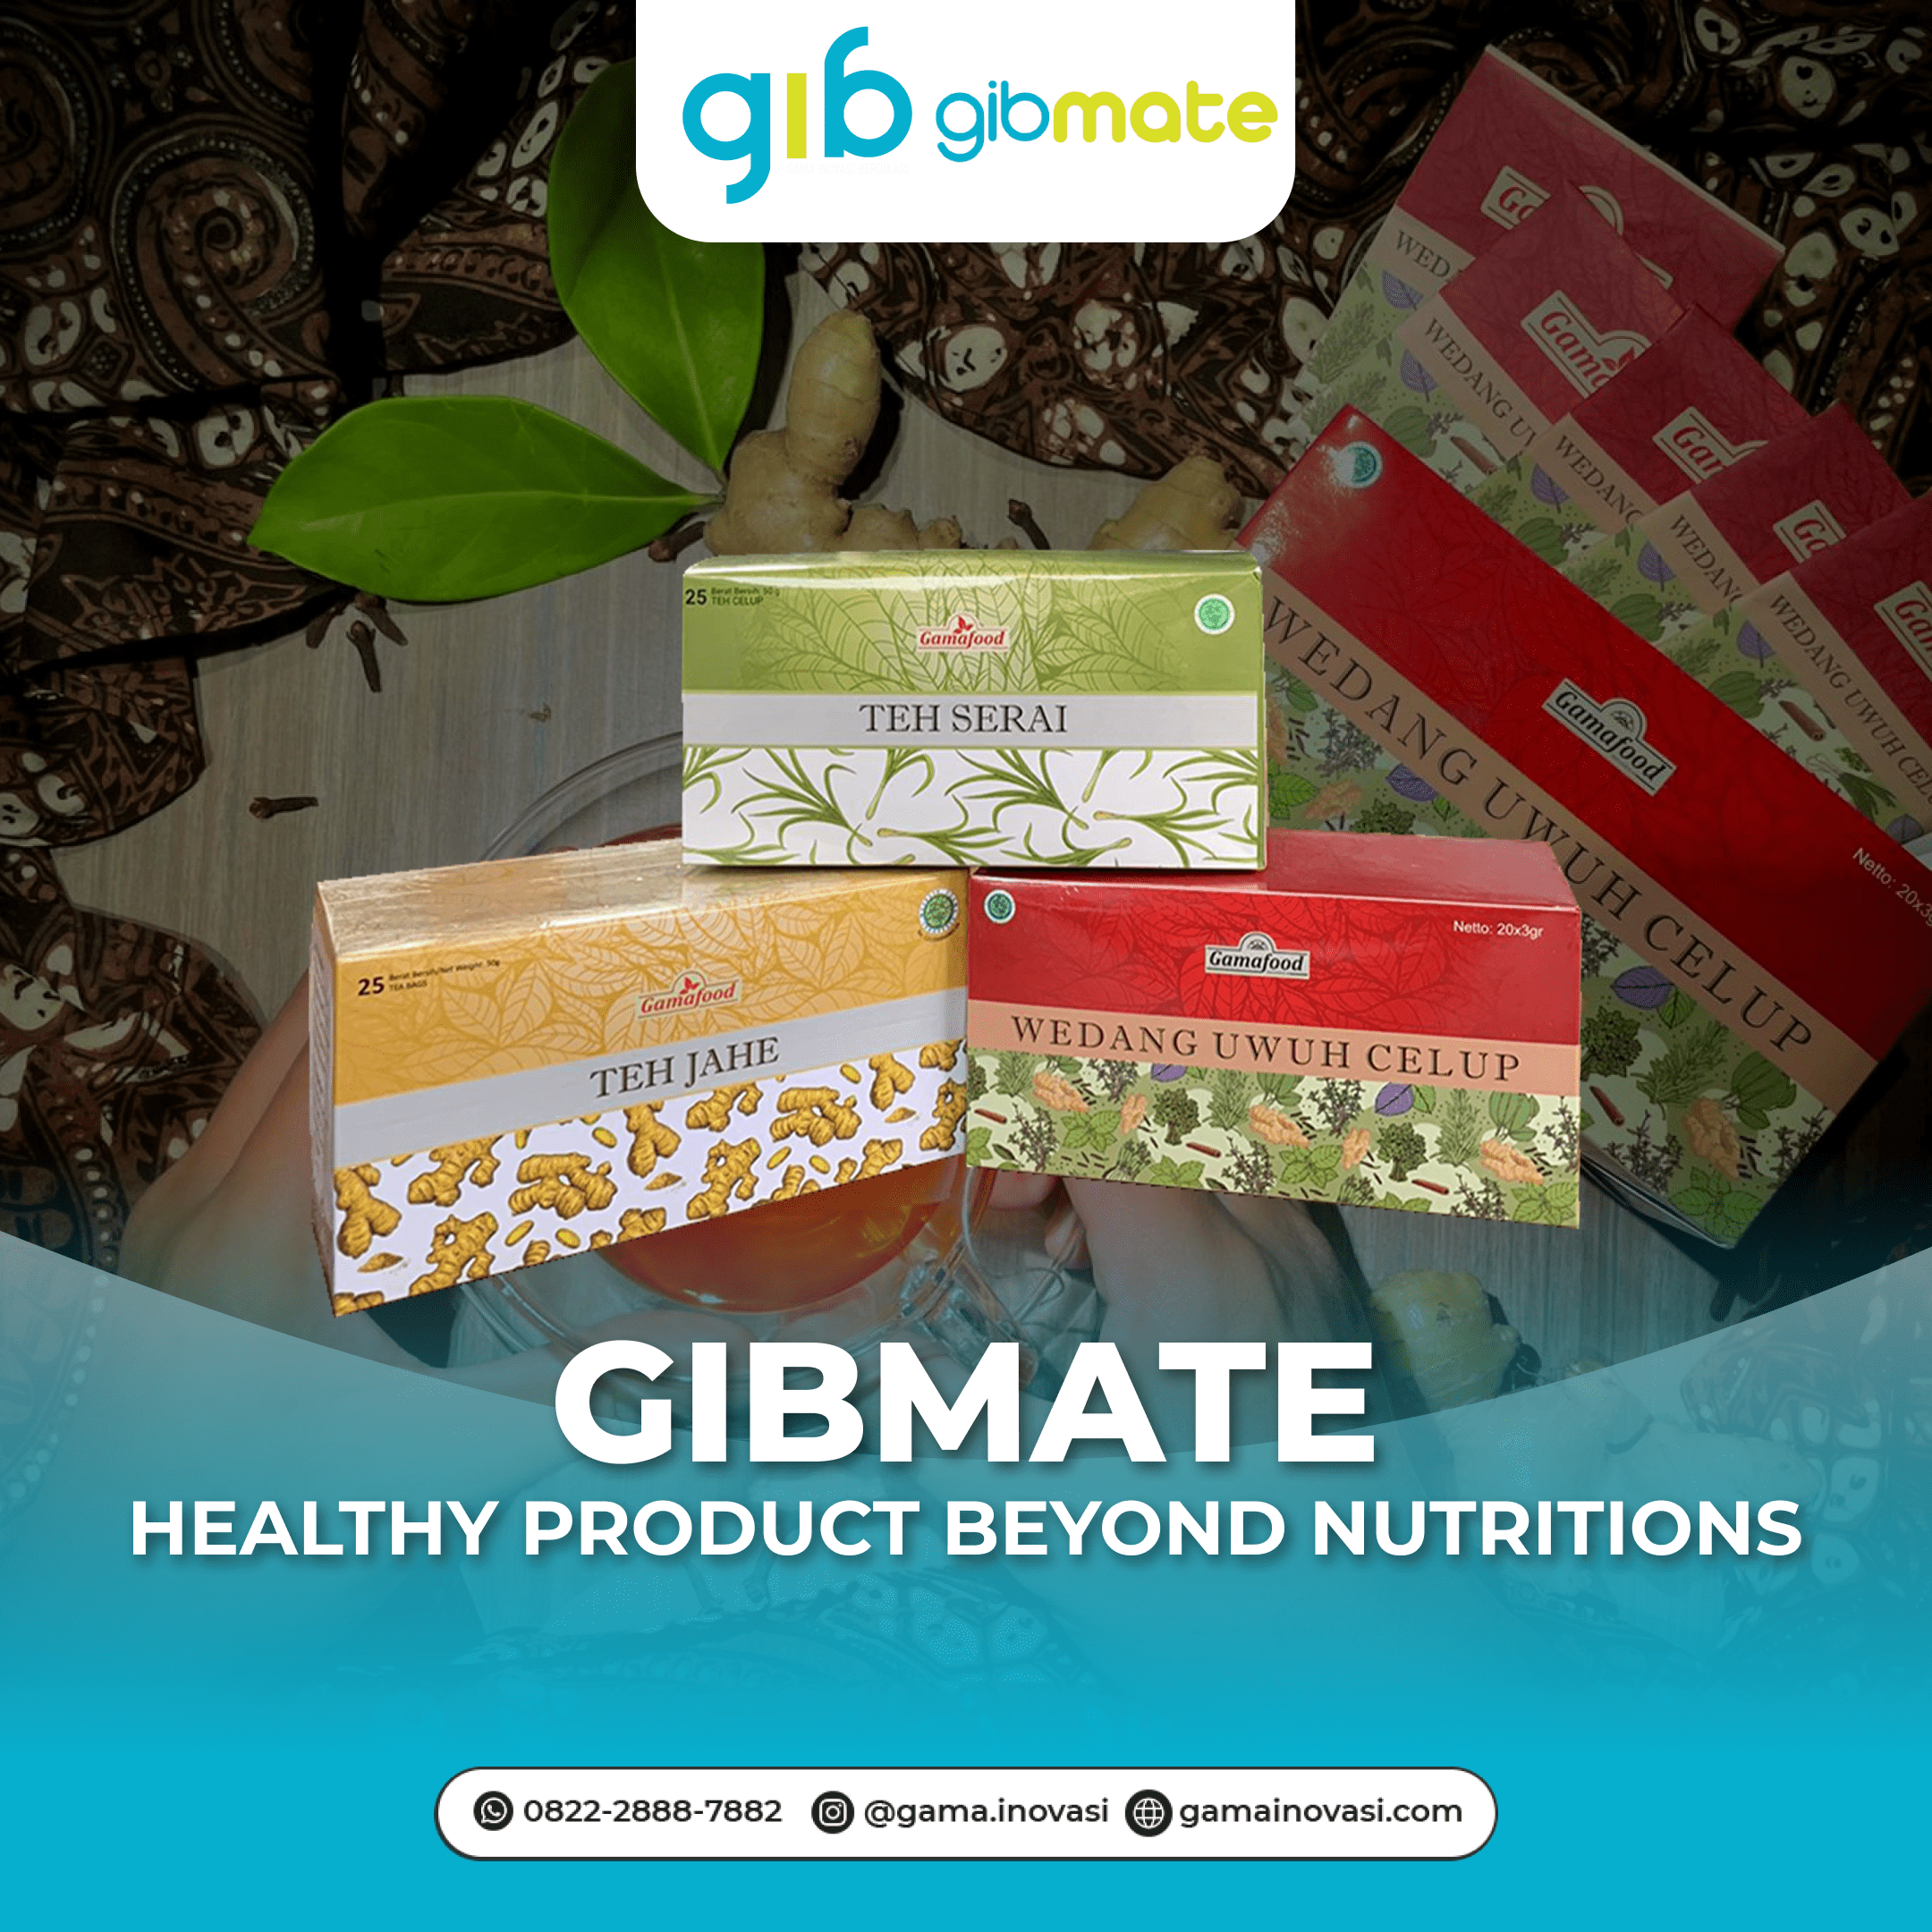 GIBMATE: Healthy Product Beyond Nutritions